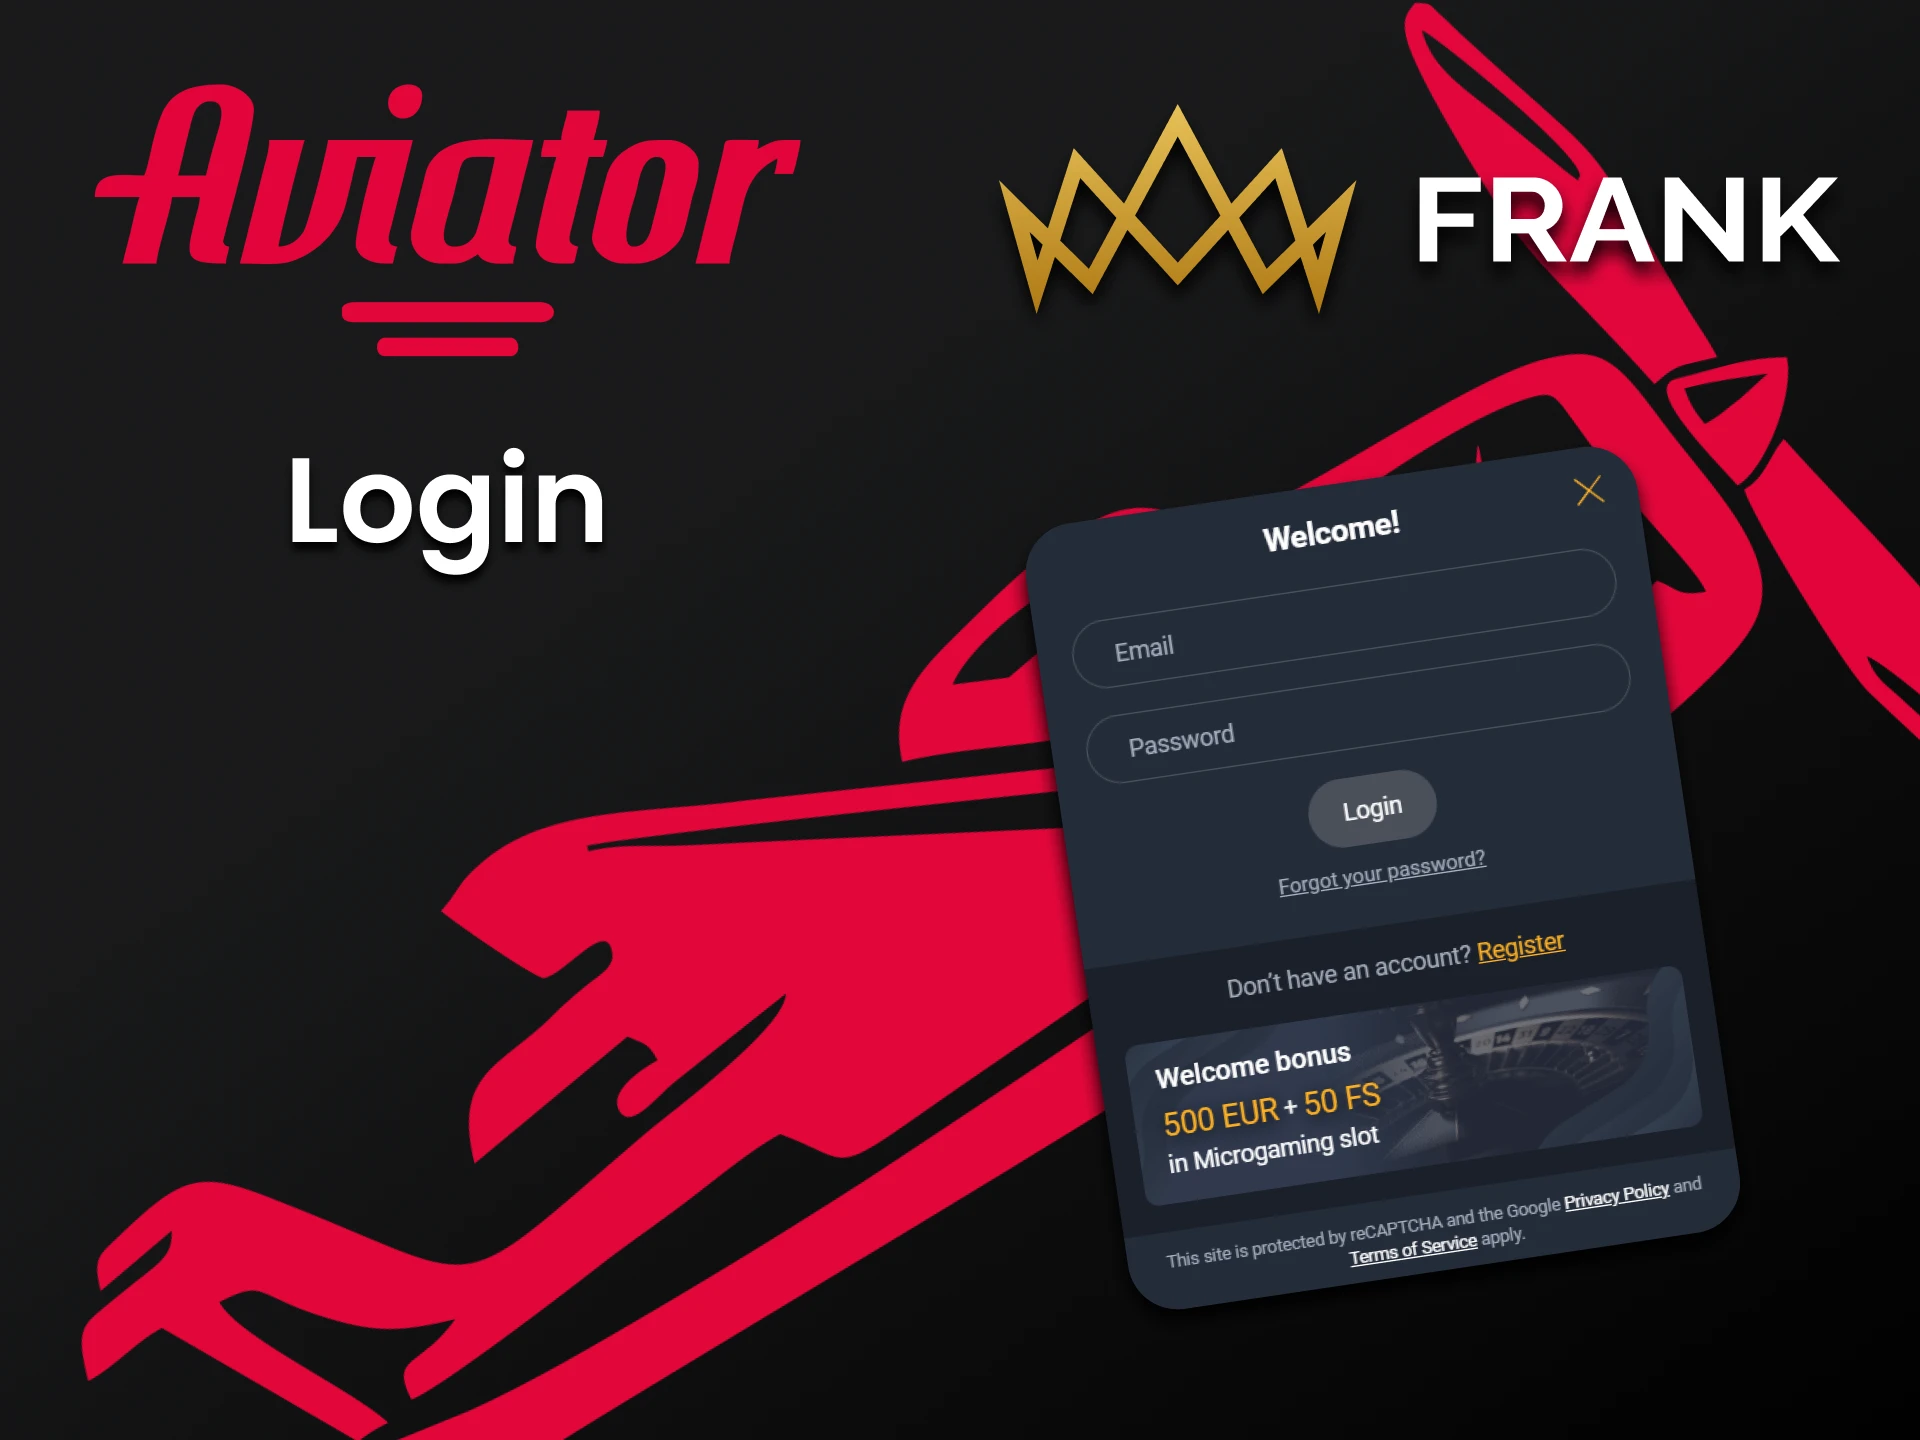 Use your Frank Casino account to play Aviator.